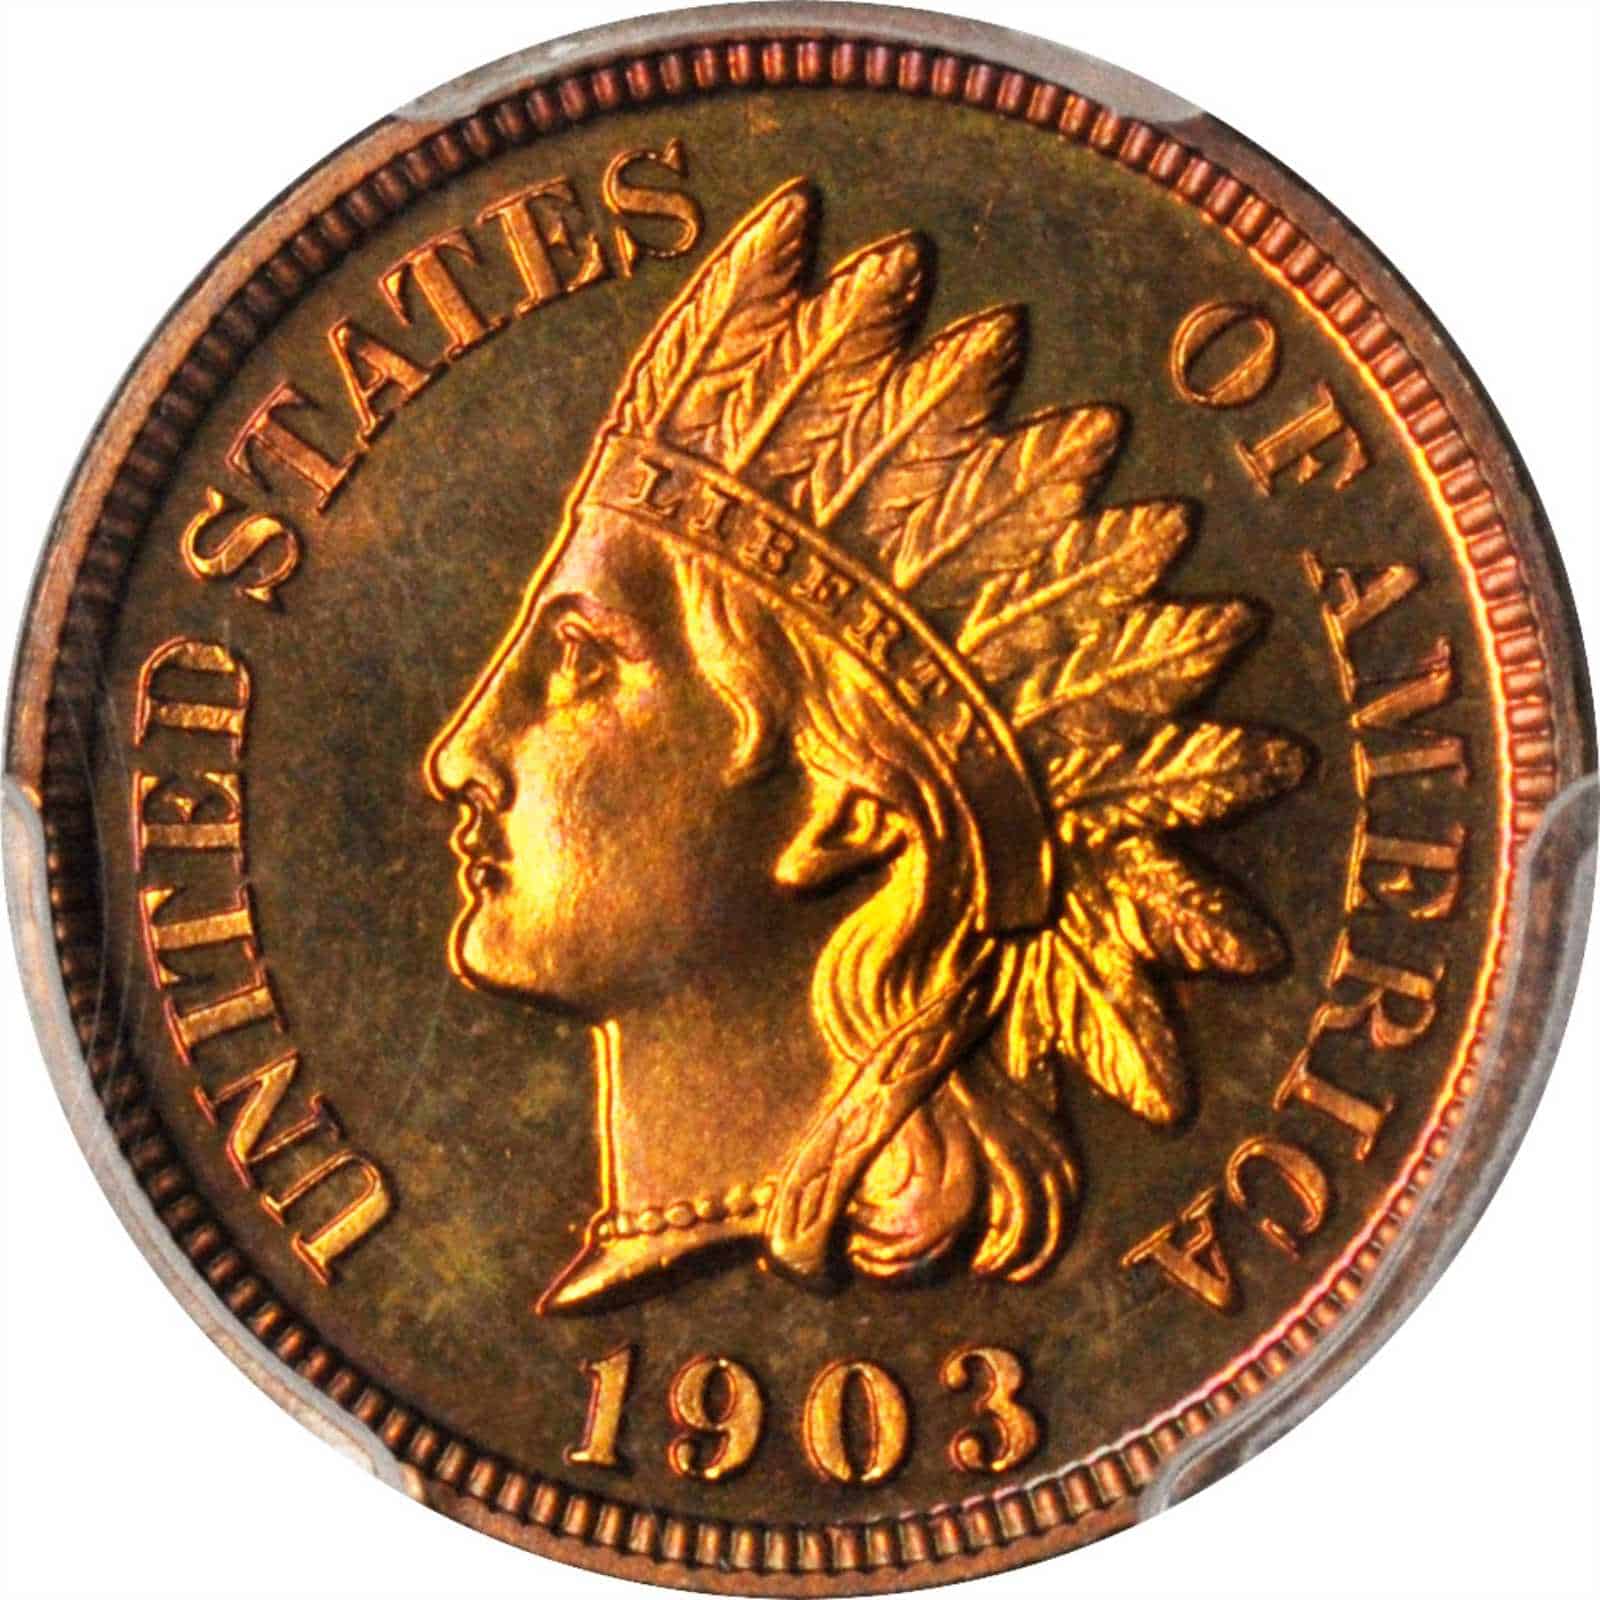 1903 (P) Proof Indian Head Value